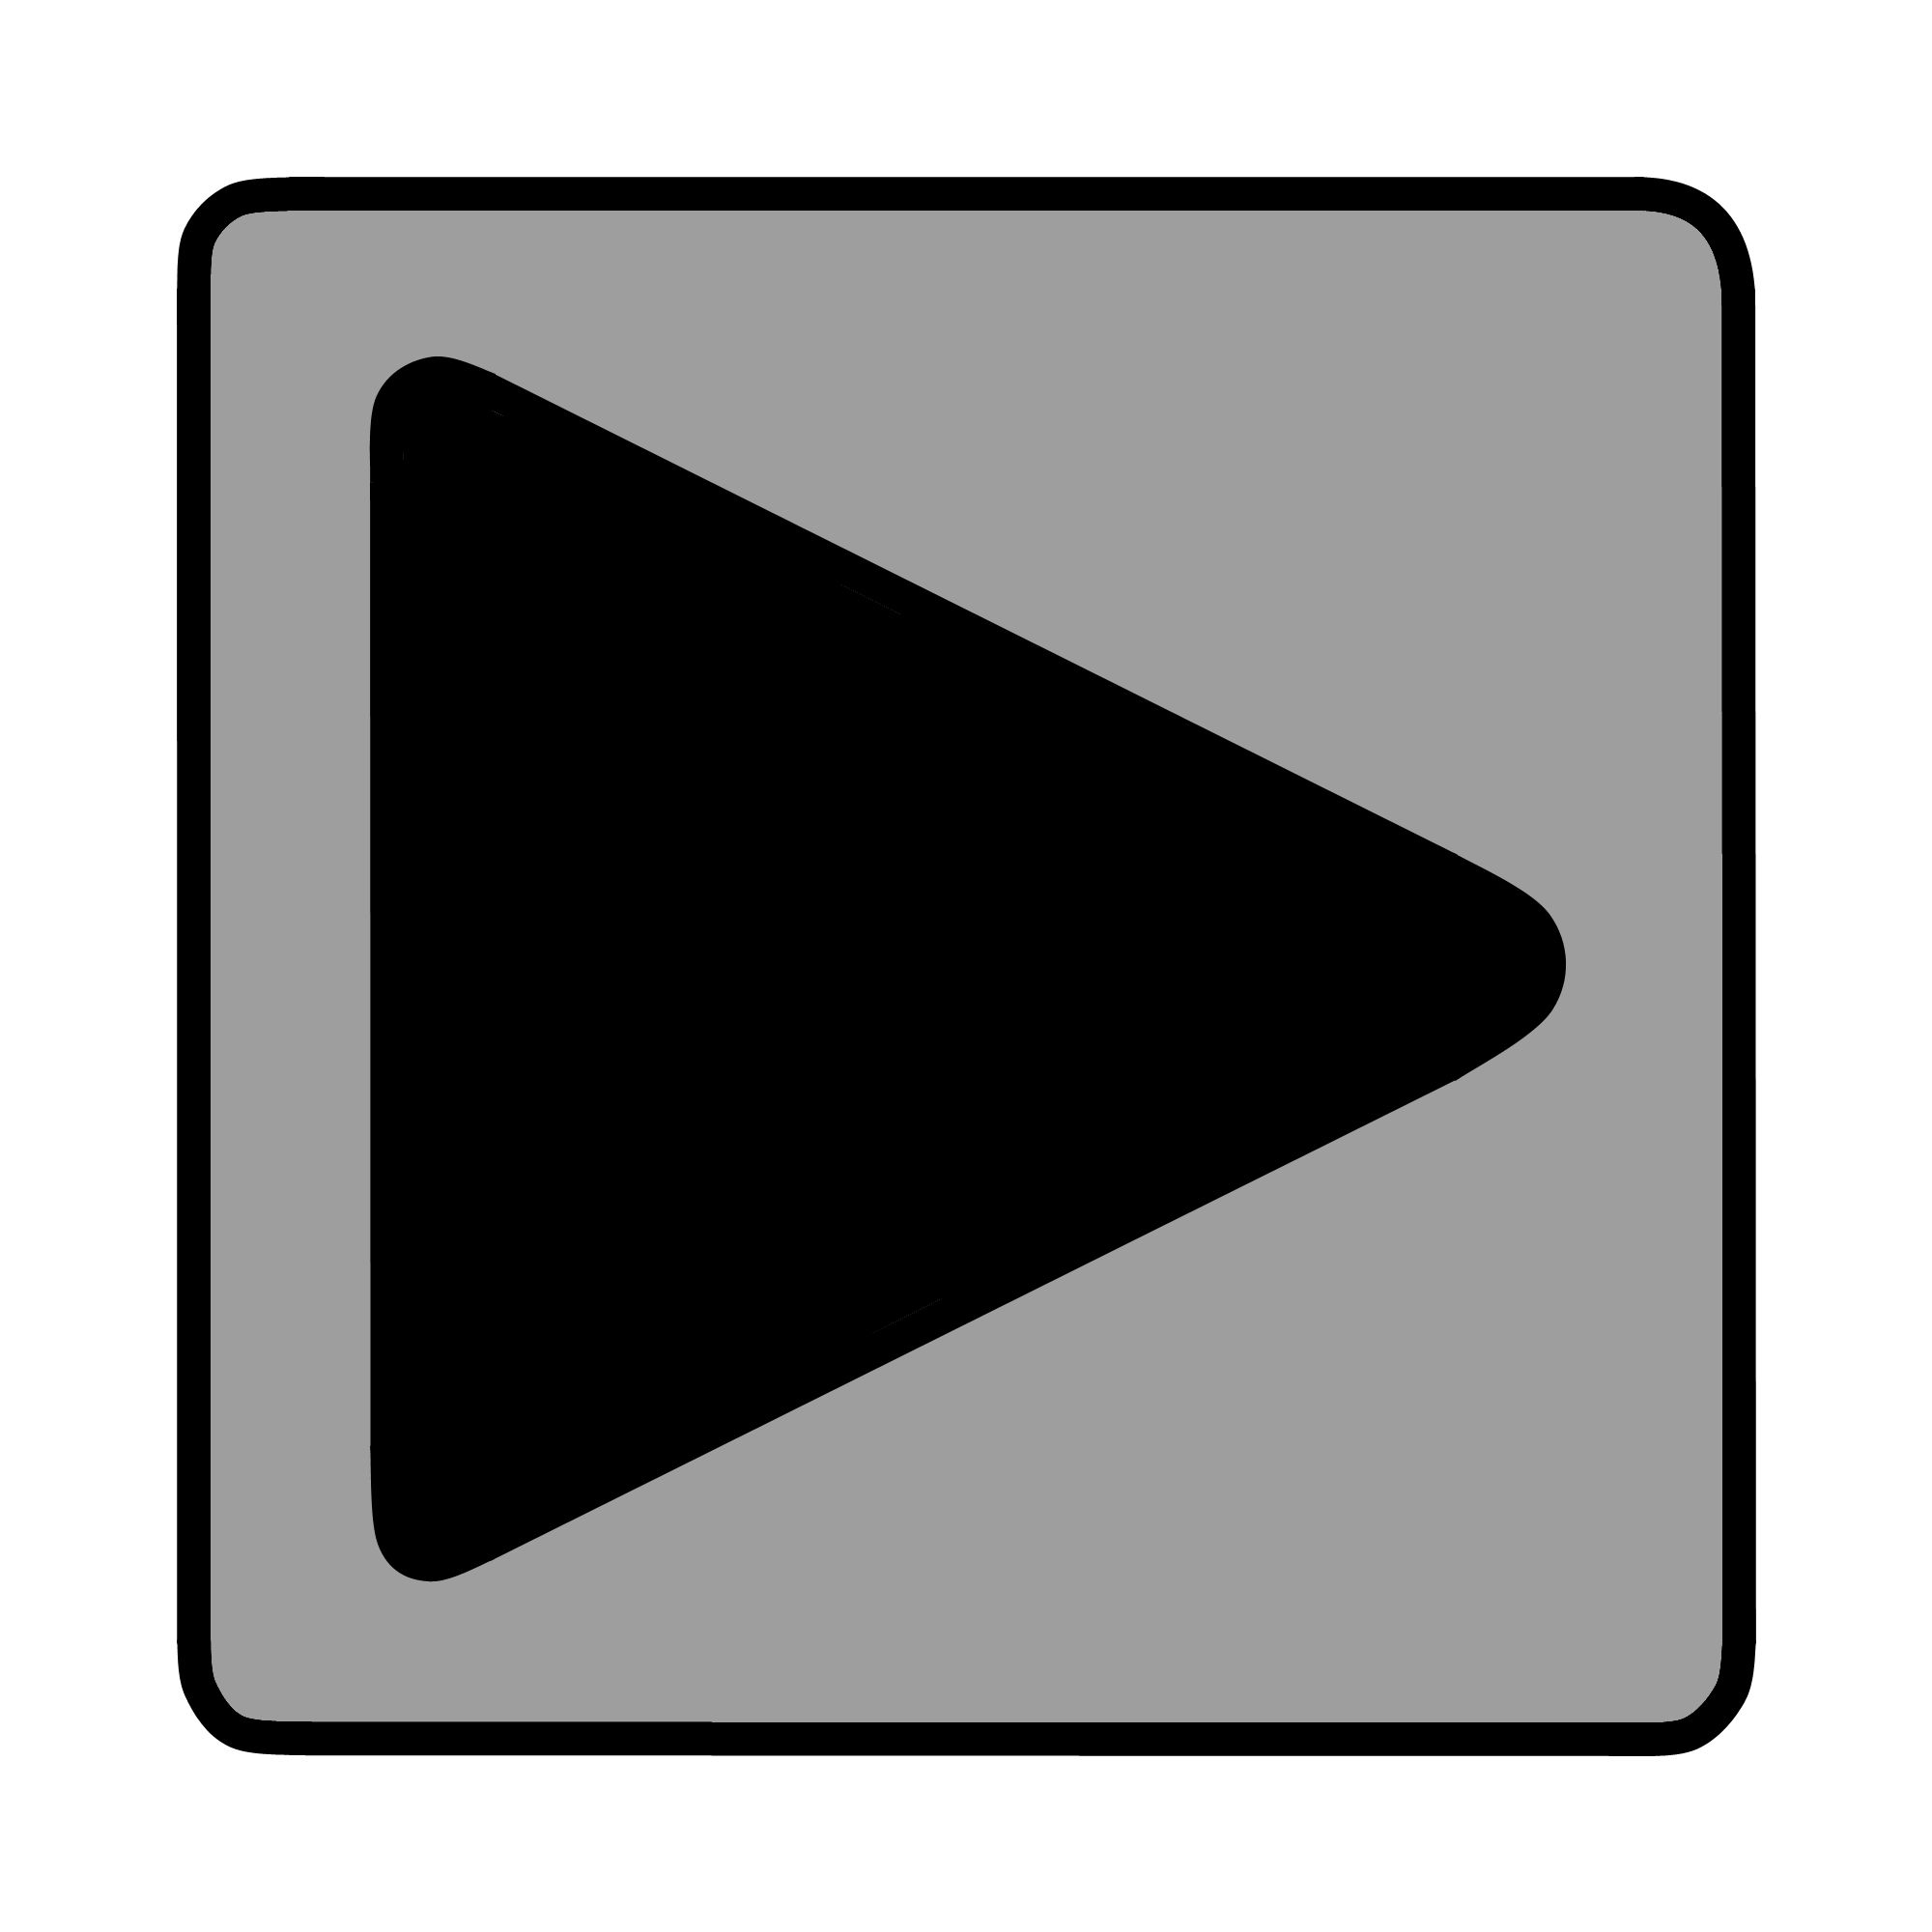 Play Button Images - ClipArt Best